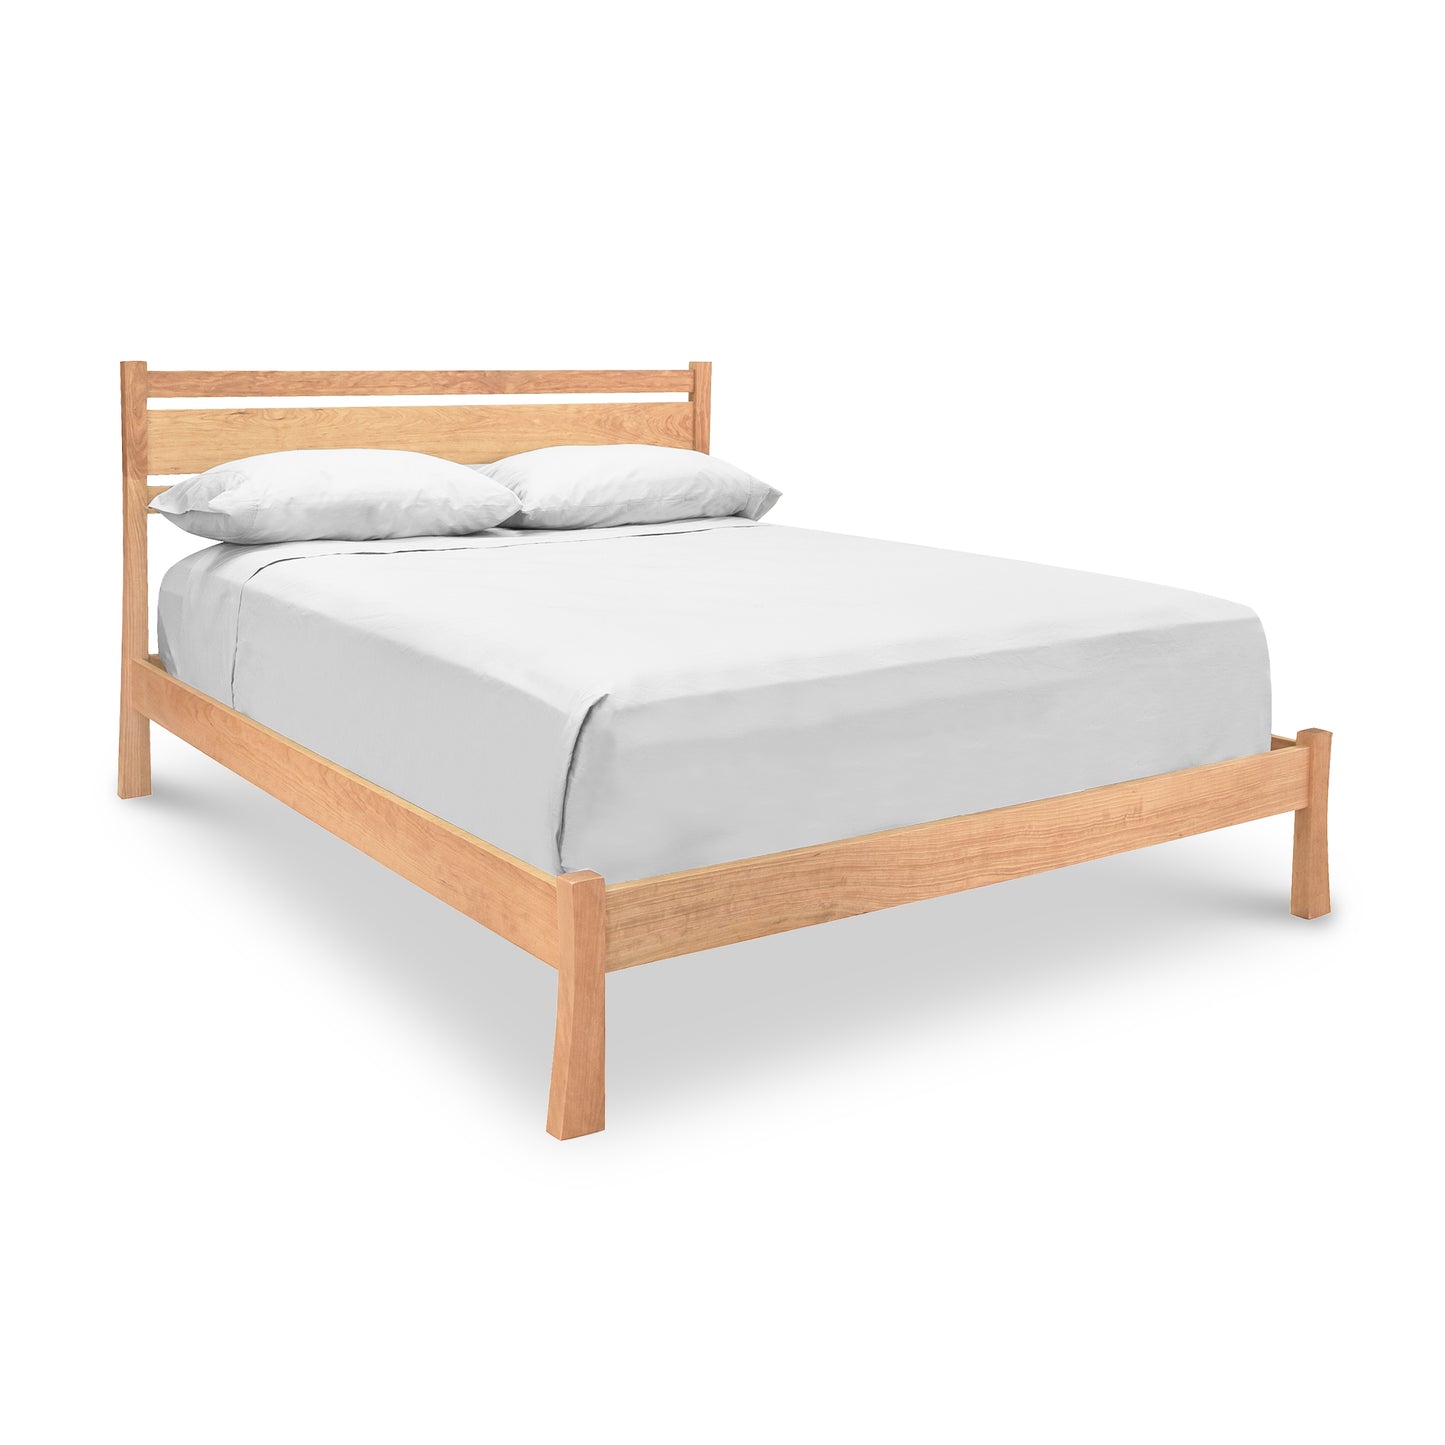 A Vermont Furniture Designs Horizon Platform Bed frame with a neatly made bed, complete with pillows and a plain white bedsheet, isolated on a white background.